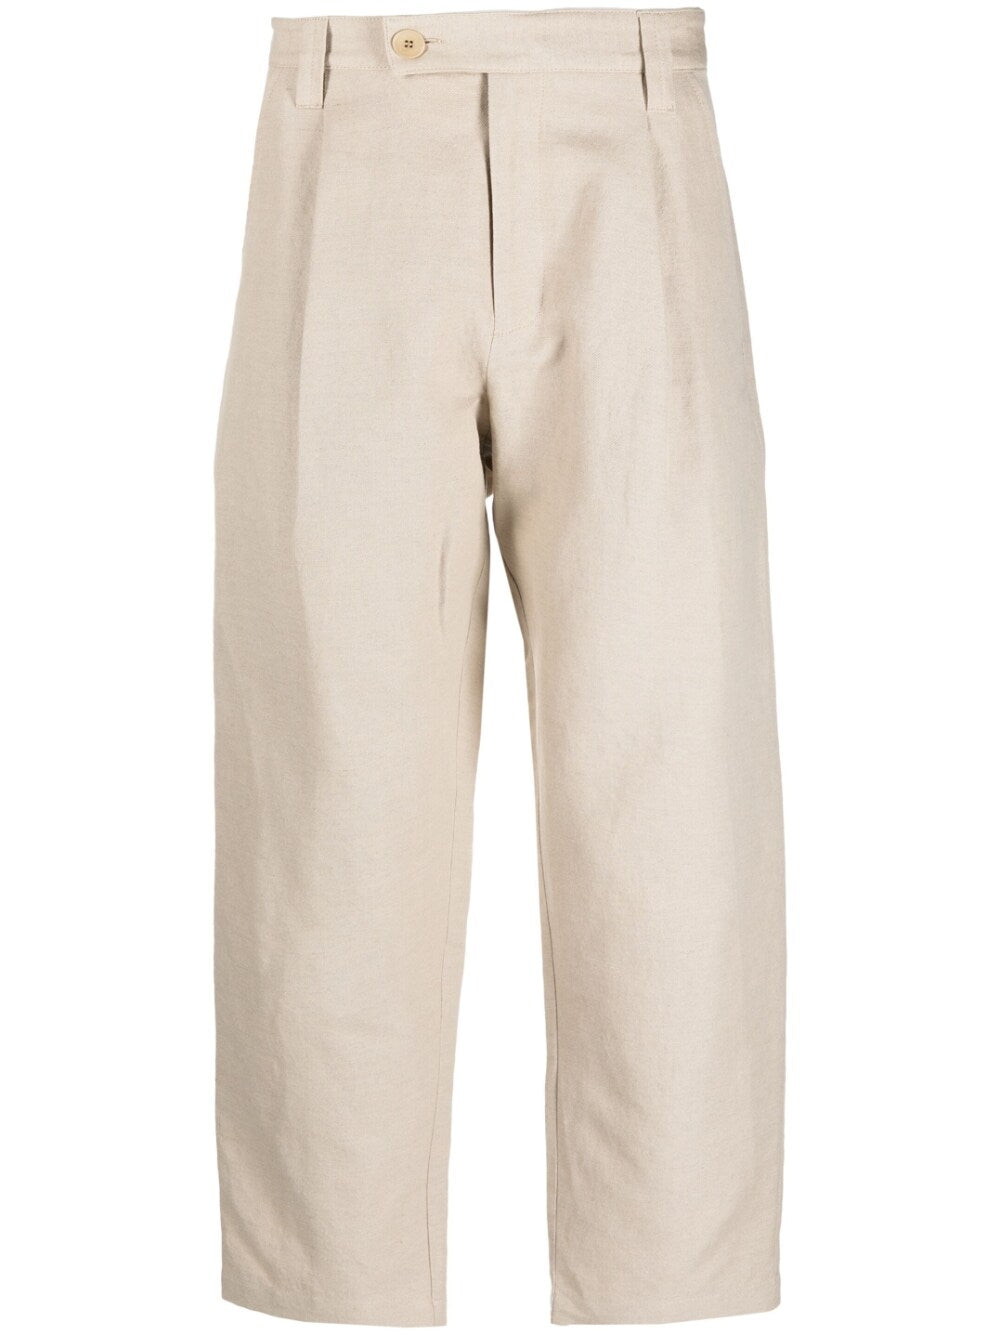 A.P.C. Trousers Beige-men > clothing > trousers-A.P.C.-Urbanheer